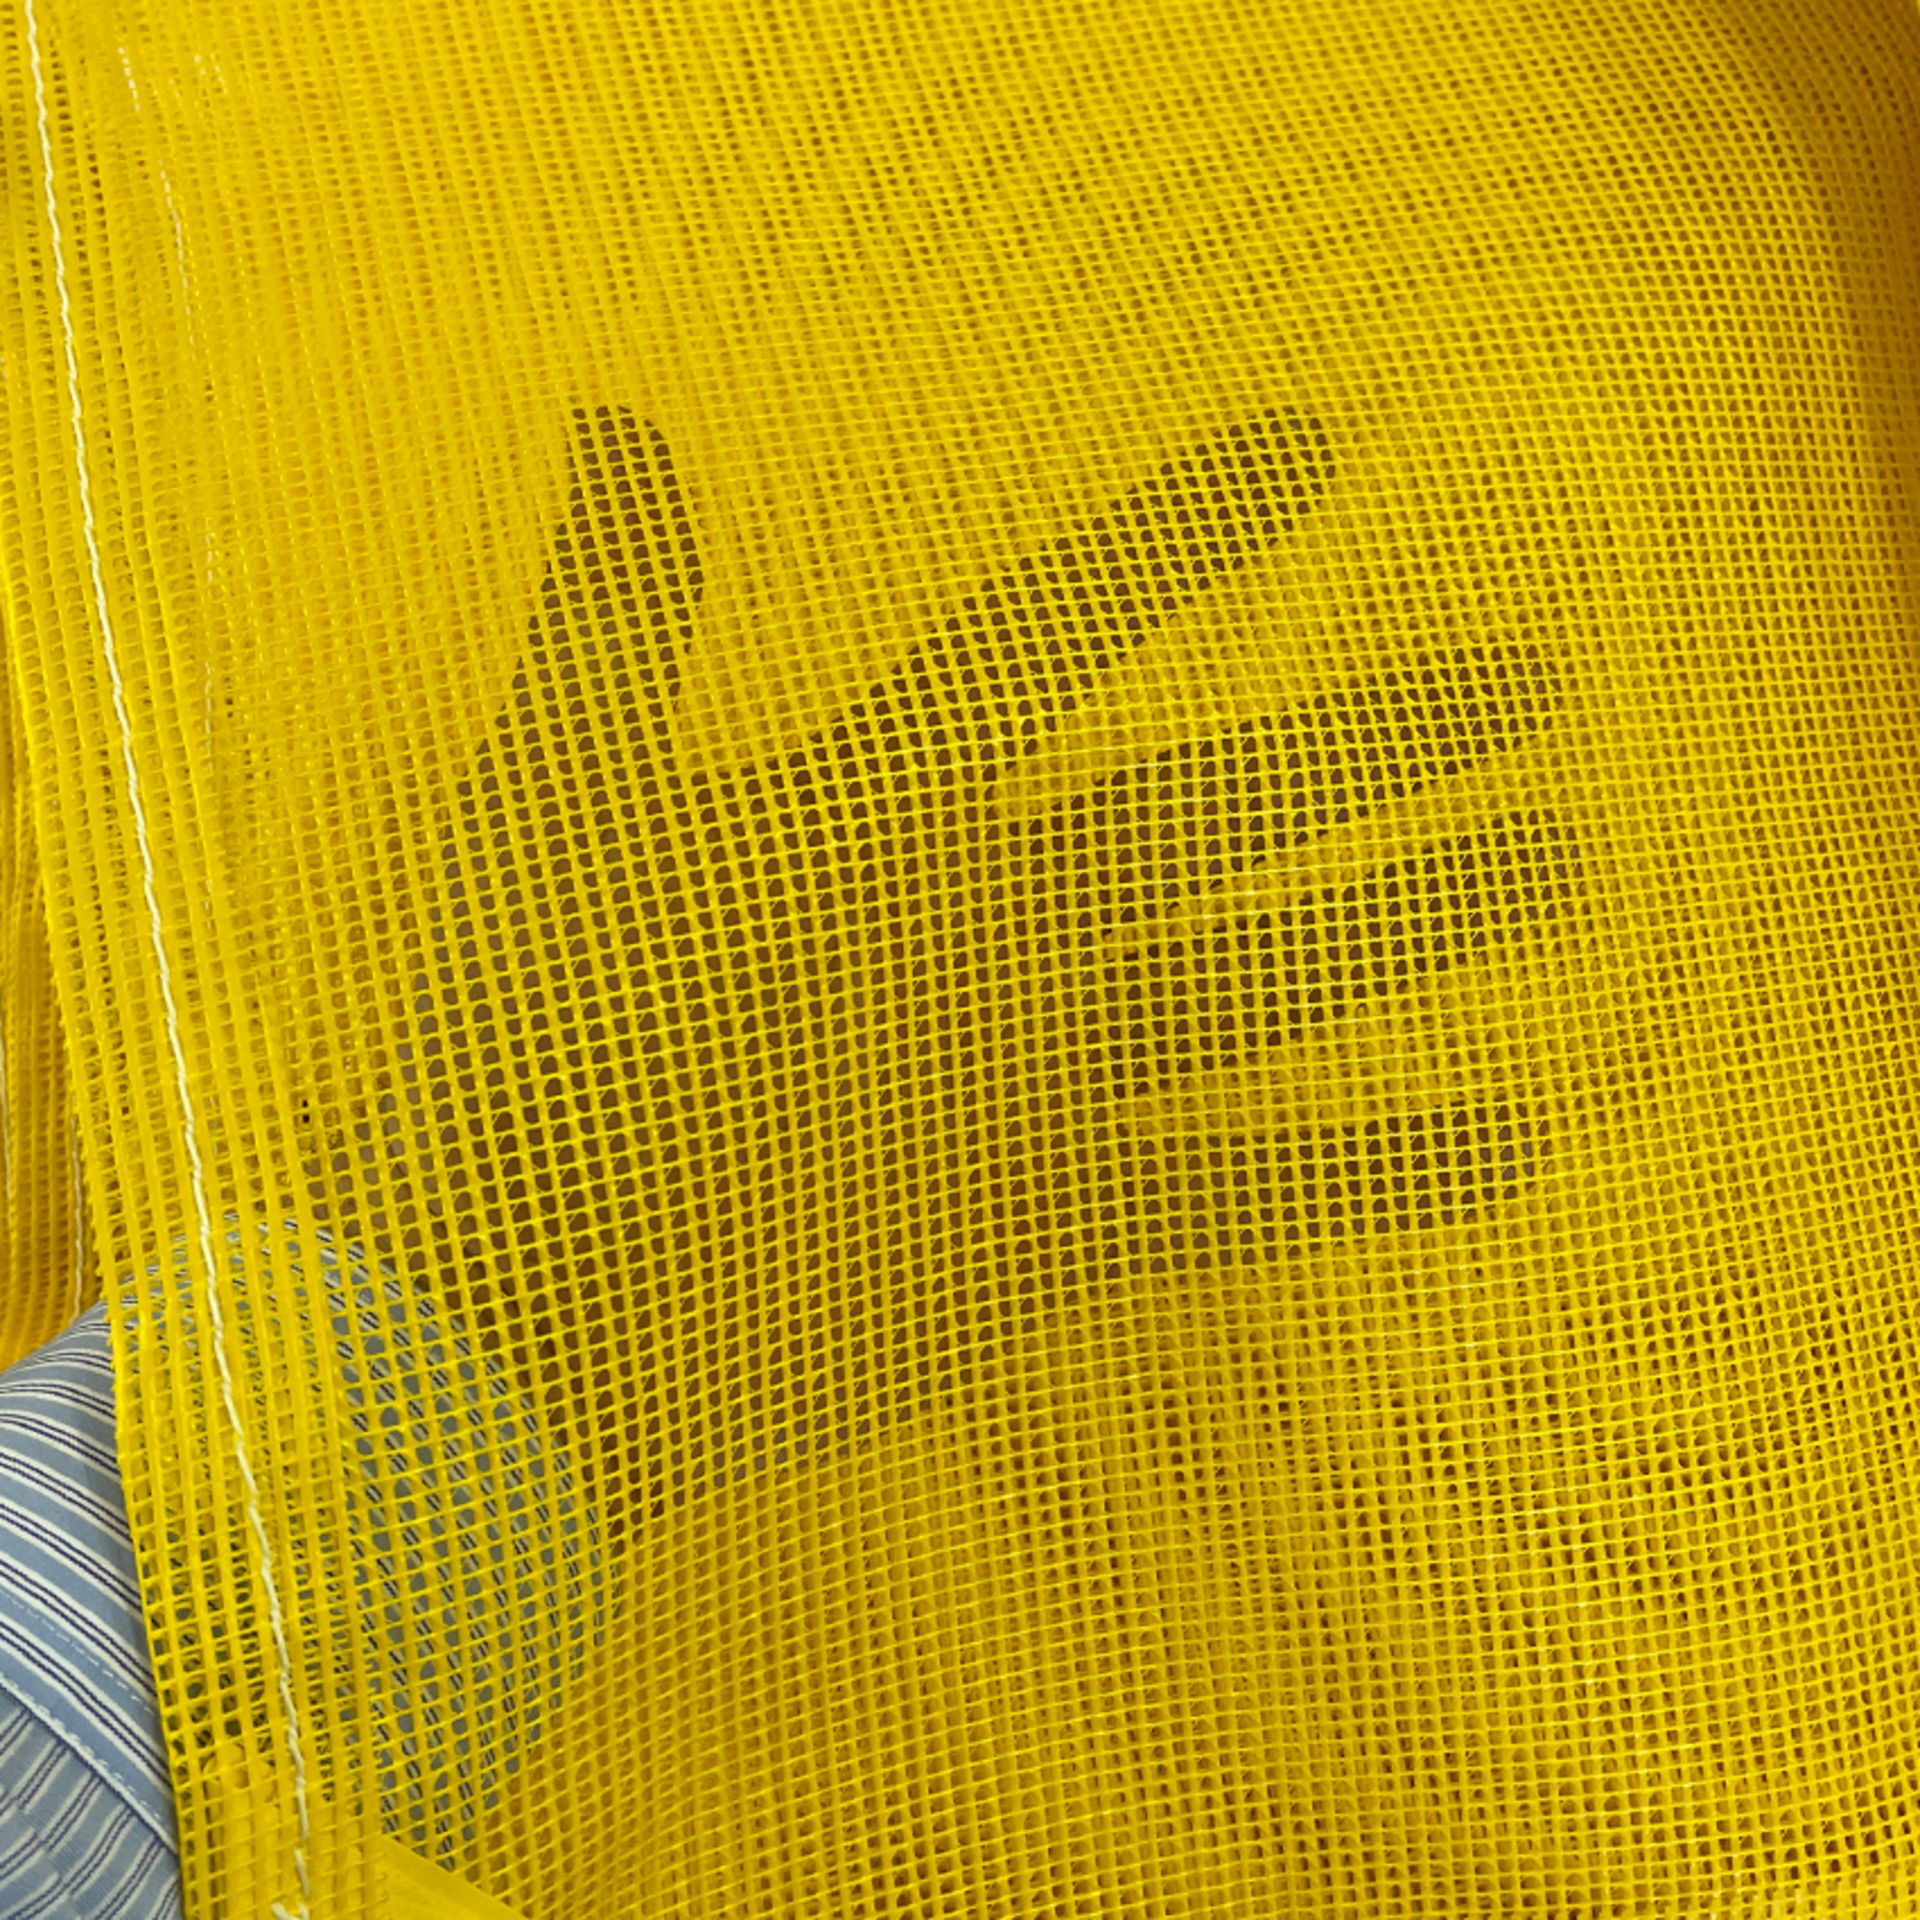 Heavy Duty Lorry Tipper Net Cover PVC Mesh High Strength With Eyelets & Bungee Cord 4m x 3m Yello... - Image 3 of 3